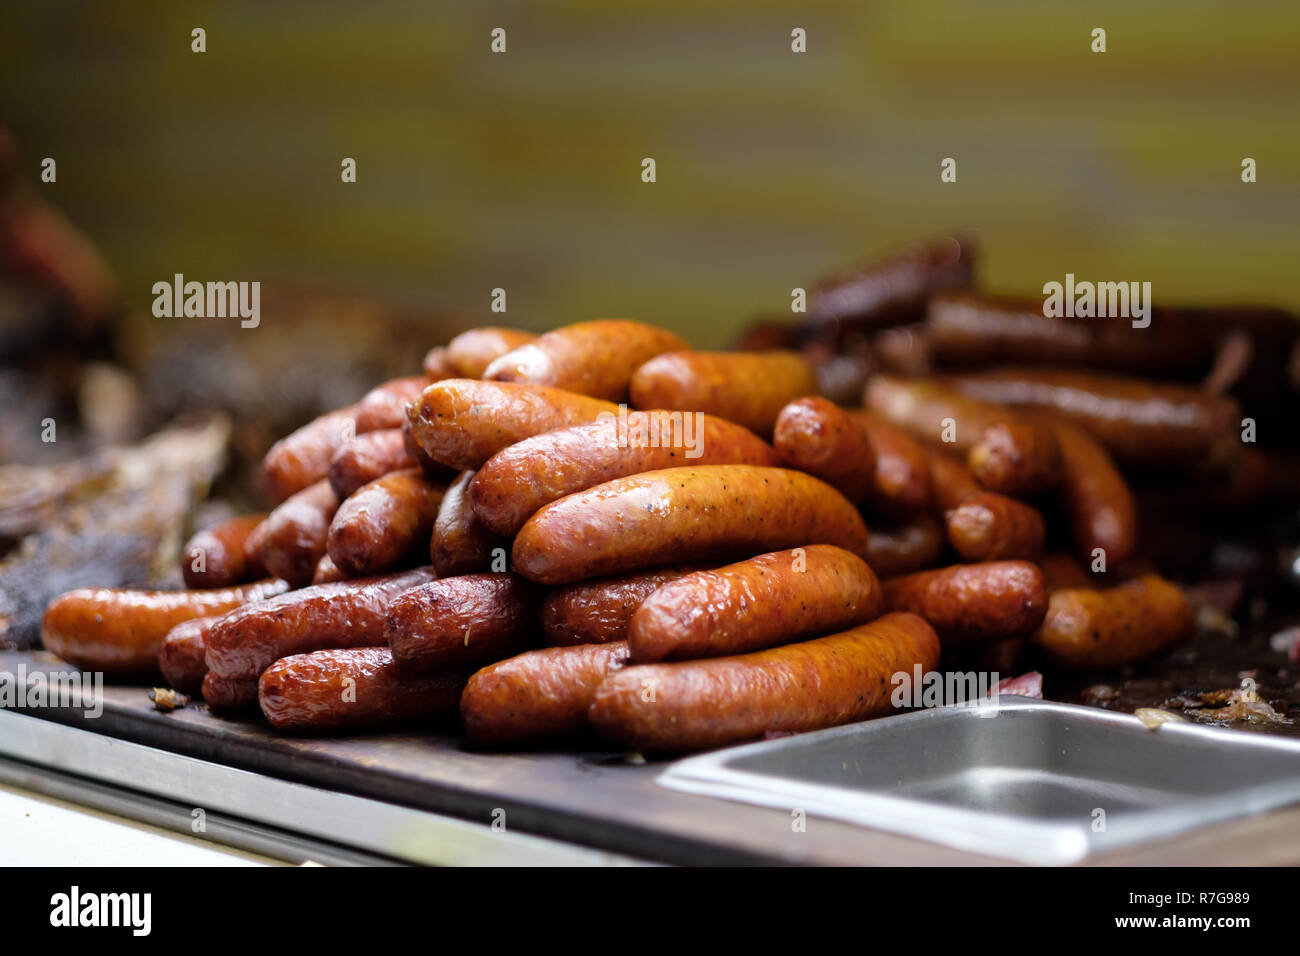 Piles of grilled barbecue sausage Stock Photo